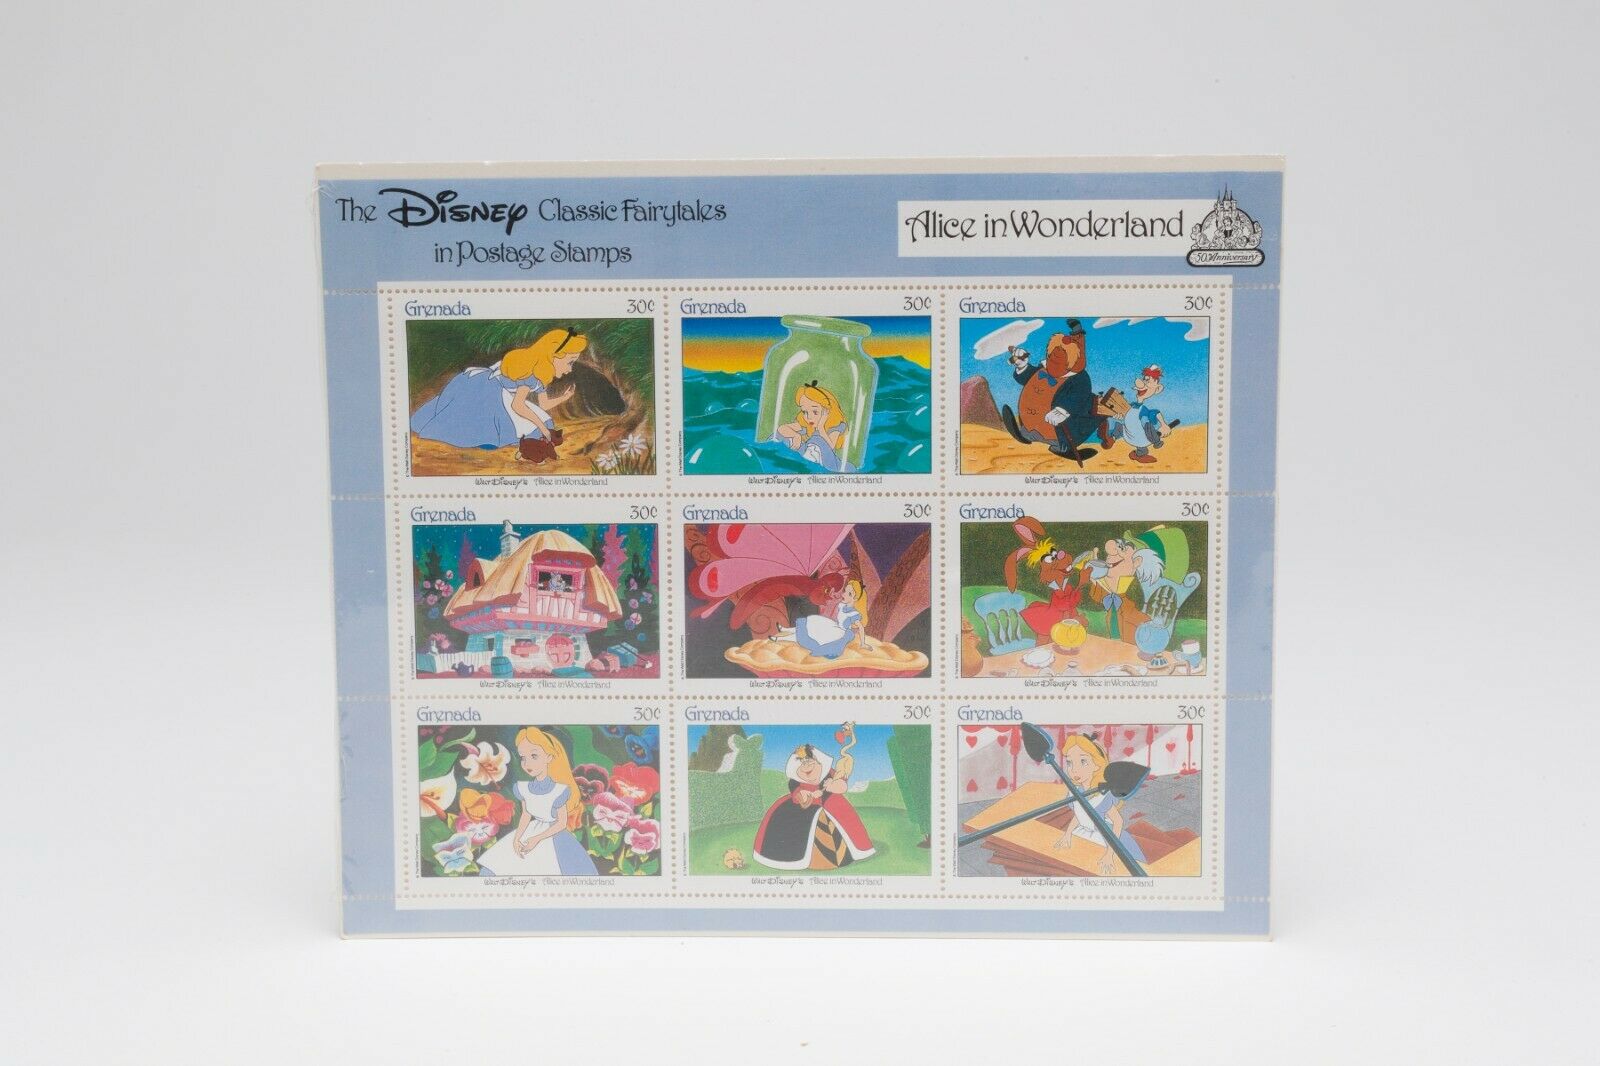 DISNEY CLASSIC FAIRYTALE POSTAGE STAMPS*ALICE IN WONDERLAND 50th ANNIVERSARY